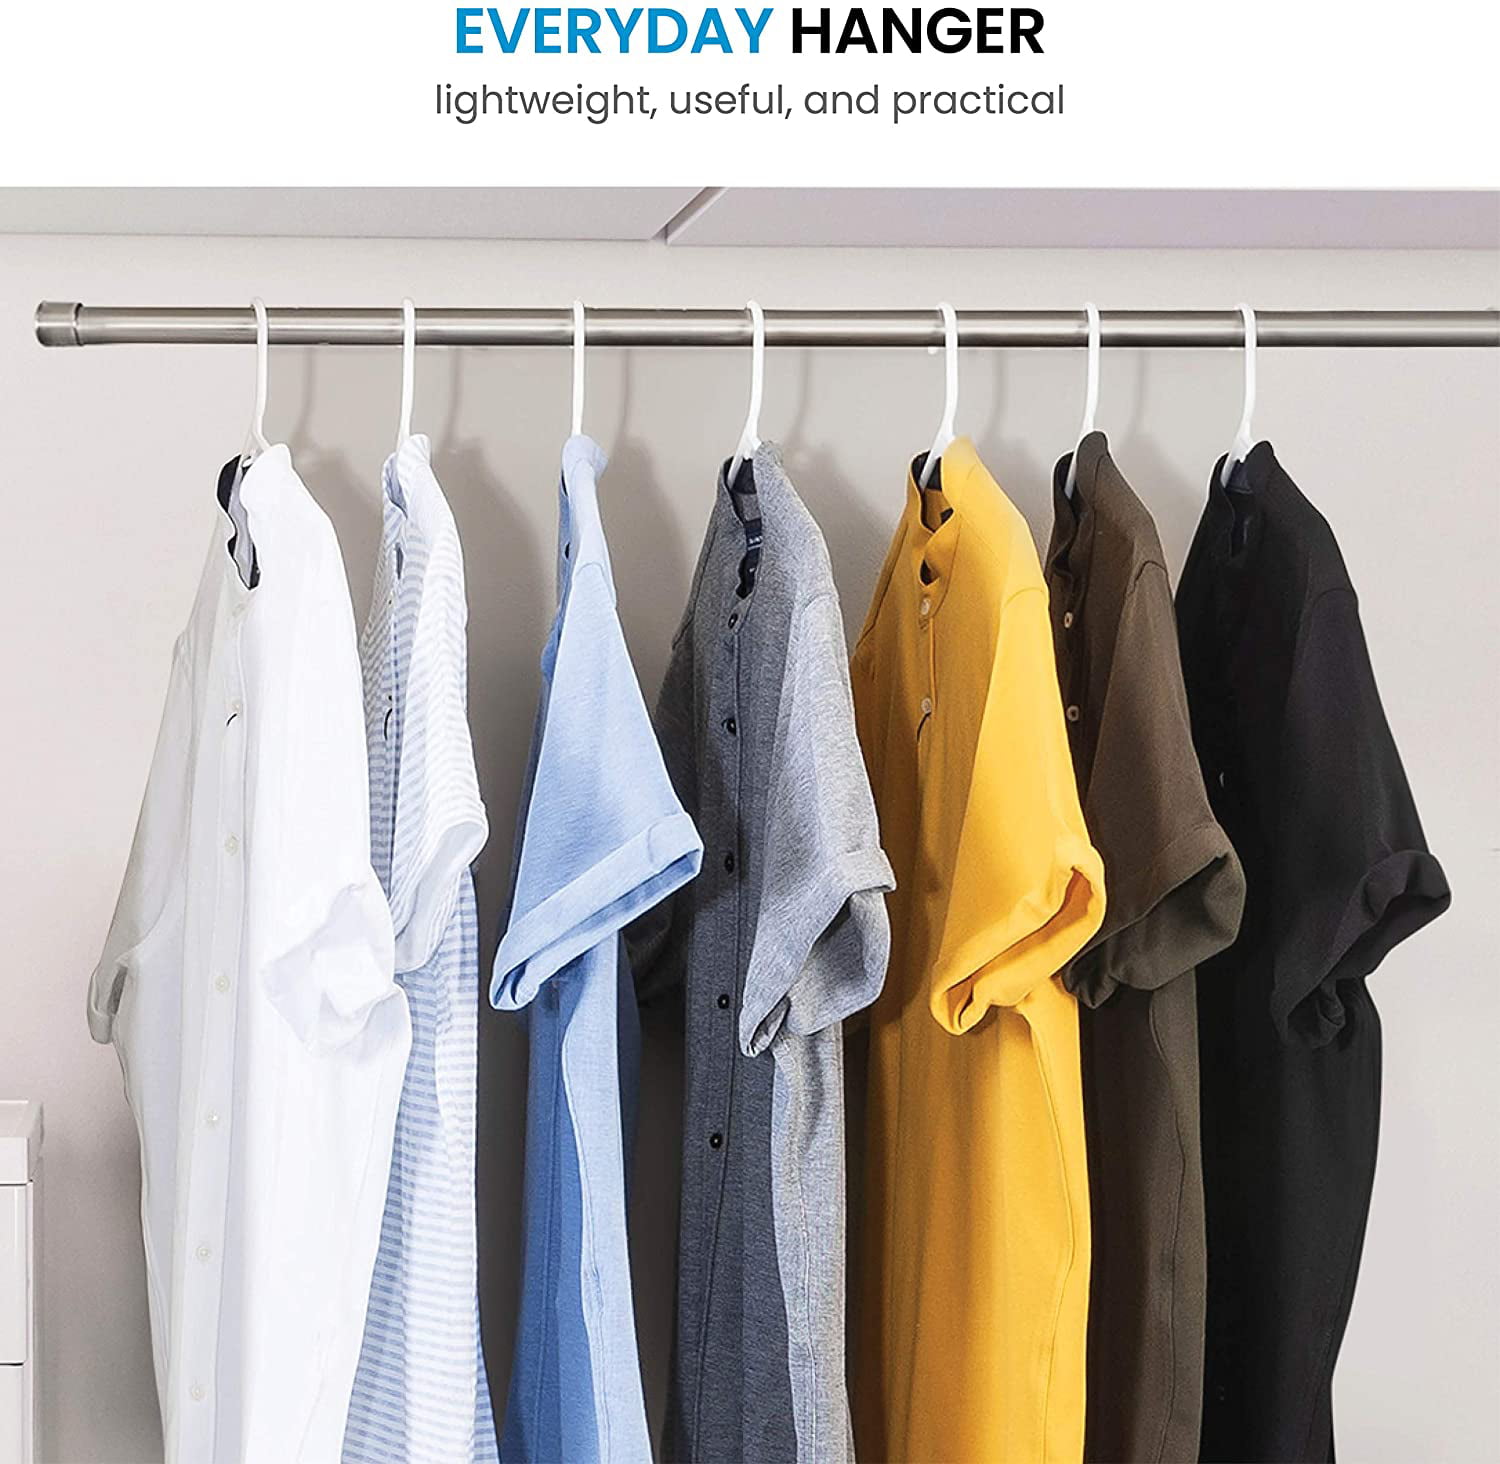 Heshberg Plastic Hooks Hangers Space Saving Tubular Clothes Hangers Standard Size Ideal for Everyday Use on Shirts, Coats, Pants